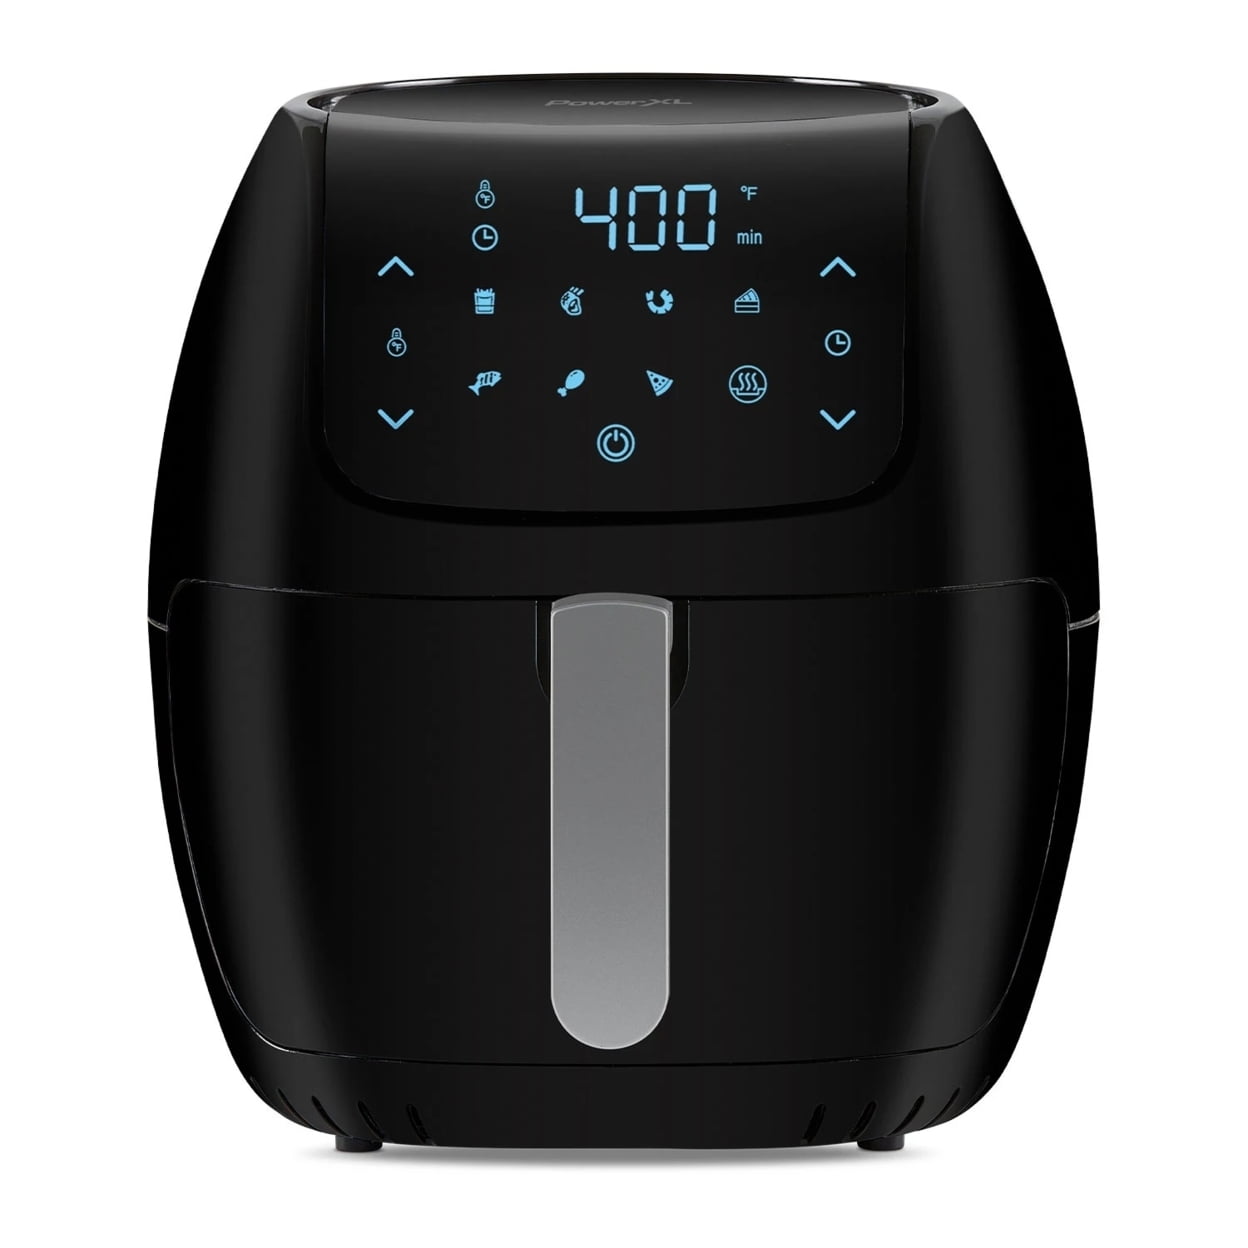 PowerXL Large 8-Quart Non-Stick Air Fryer with One-Touch Digital Display, Black